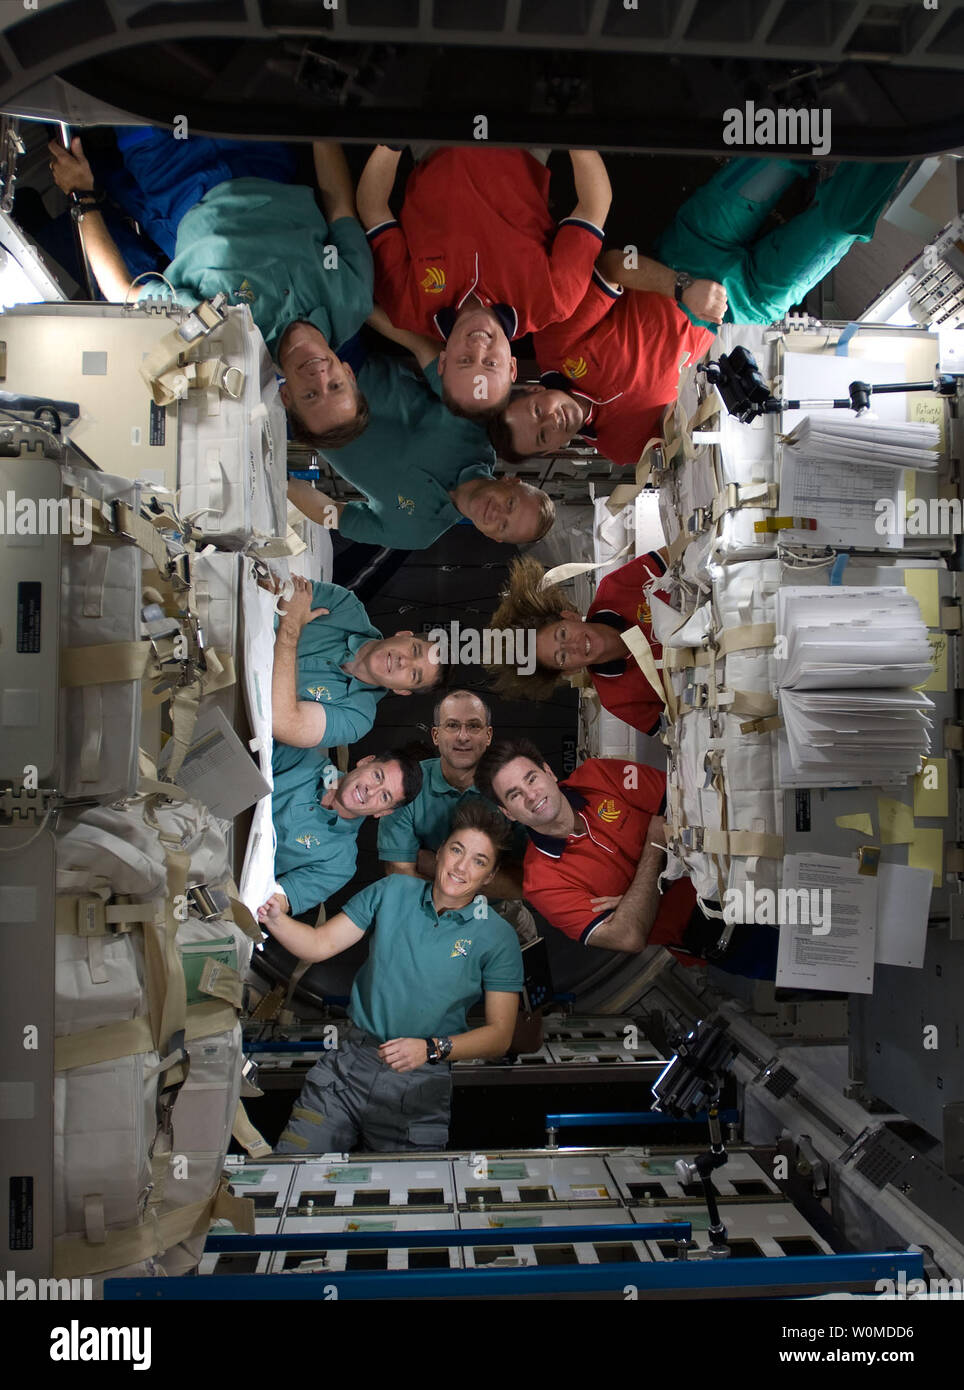 In this Novemner 21, 2008 NASA image members of the International Space Station and Space Shuttle Endeavour crews posed for a group portrait following a video press conference. Astronaut Donald Pettit appears at photo center. Just below Pettit is astronaut Heidemarie Stefanyshin-Piper. Clockwise from her position are astronauts Shane Kimbrough, Steve Bowen, Eric Boe, Chris Ferguson and Michael Fincke, along with cosmonaut Yury Lonchakov, and astronauts Sandra Magnus and Gregory Chamitoff. (UPI Photo/NASA) Stock Photo